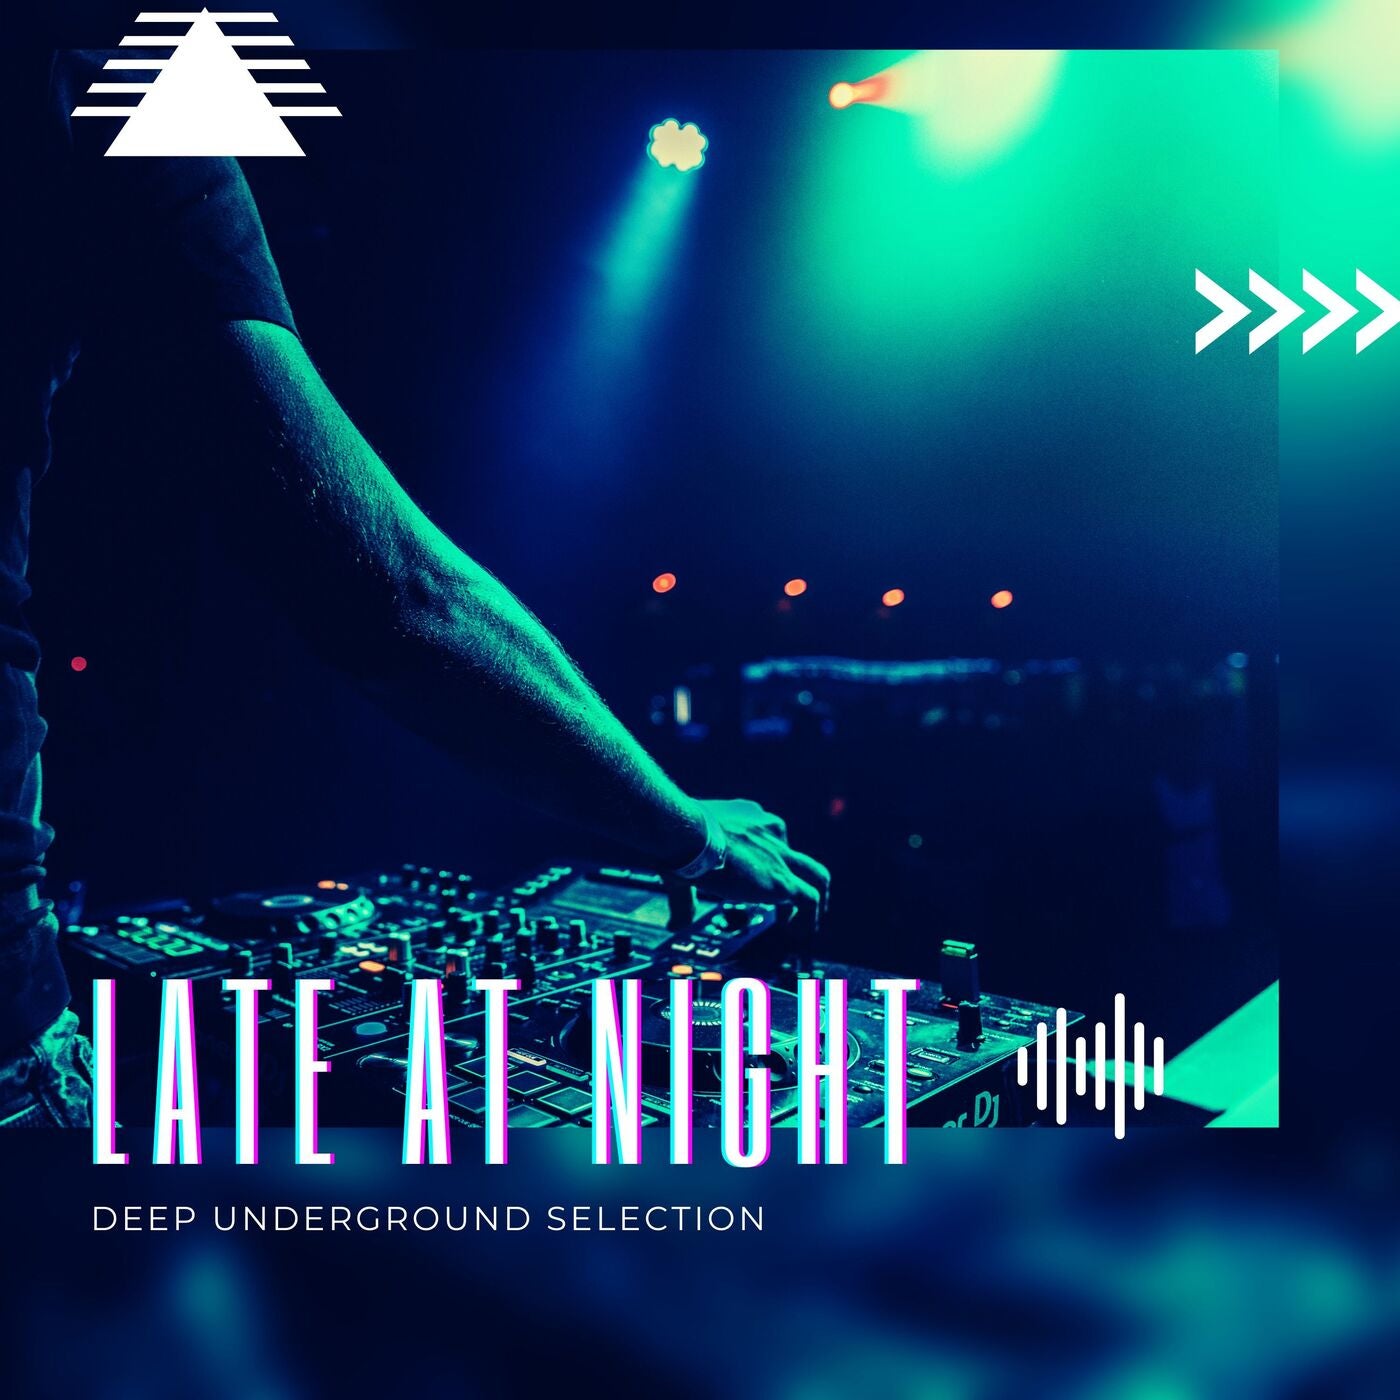 Late at Night Deep Underground Selection